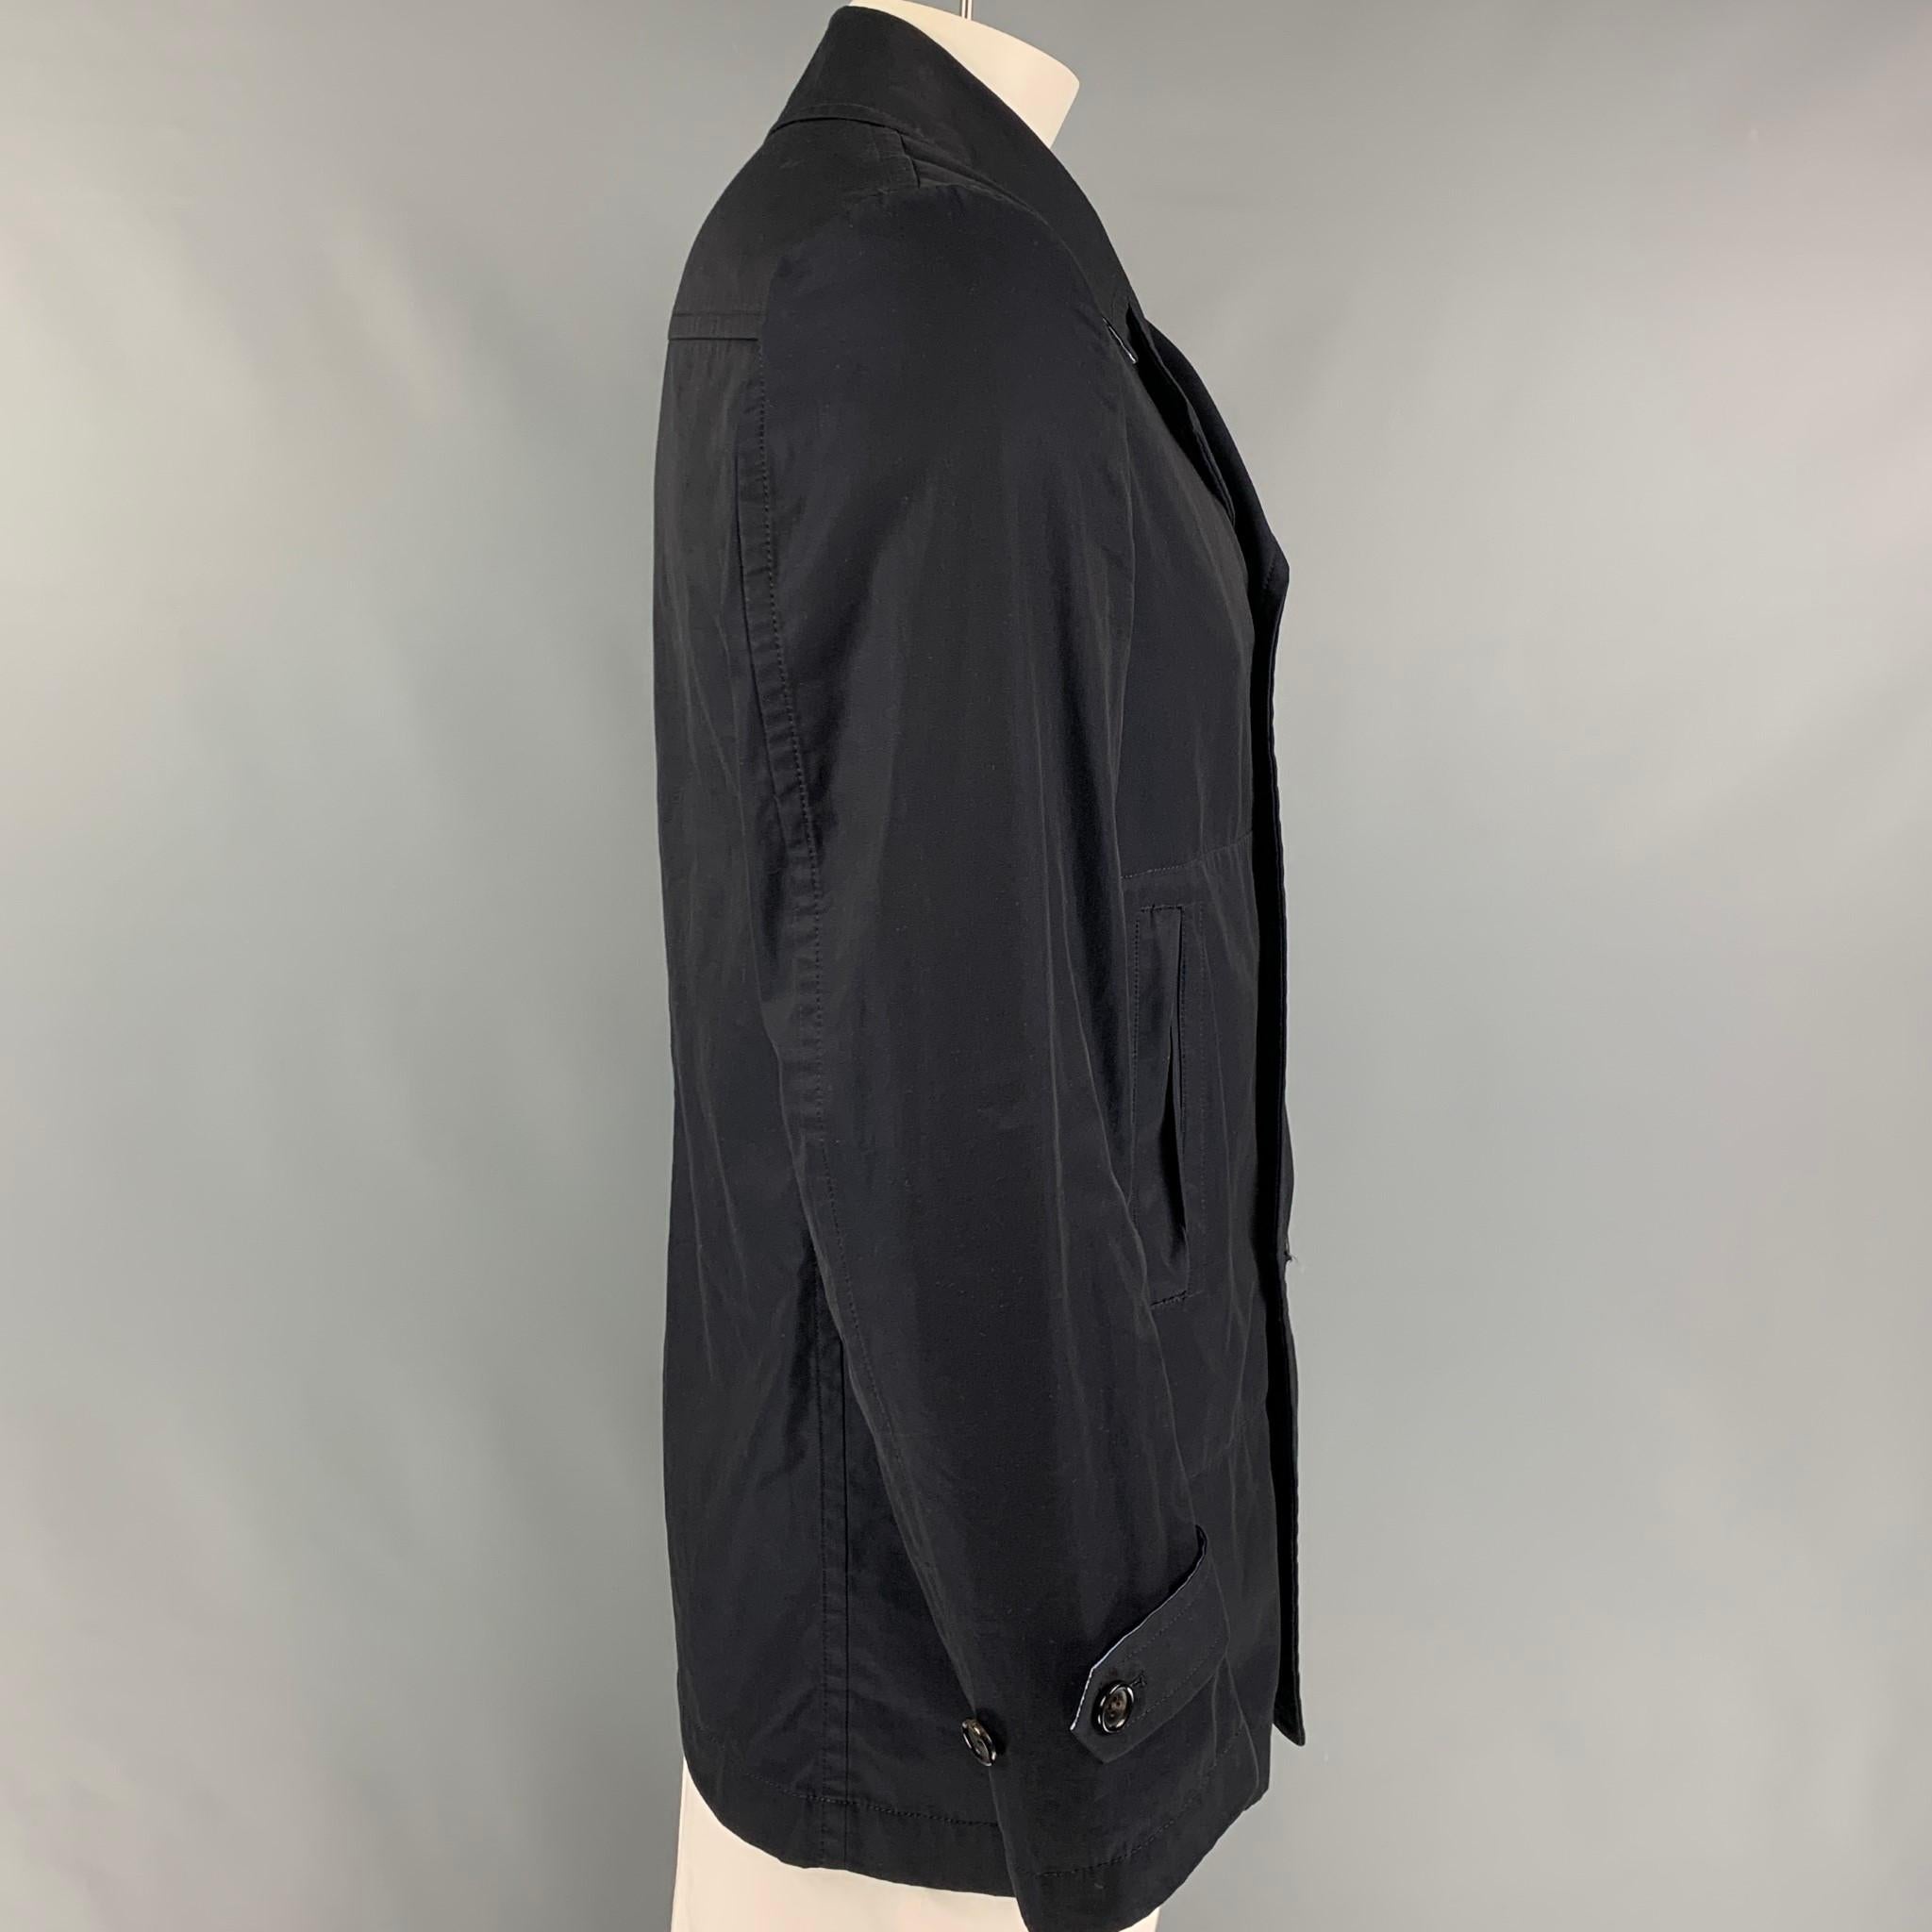 COMME des GARCONS HOMME coat comes in a navy cotton with a stipe trim lining featuring a notch lapel, slit pockets, and a double breasted closure. Made in Japan. 

Very Good Pre-Owned Condition.
Marked: AD2008 / L

Measurements:

Shoulder: 17.5